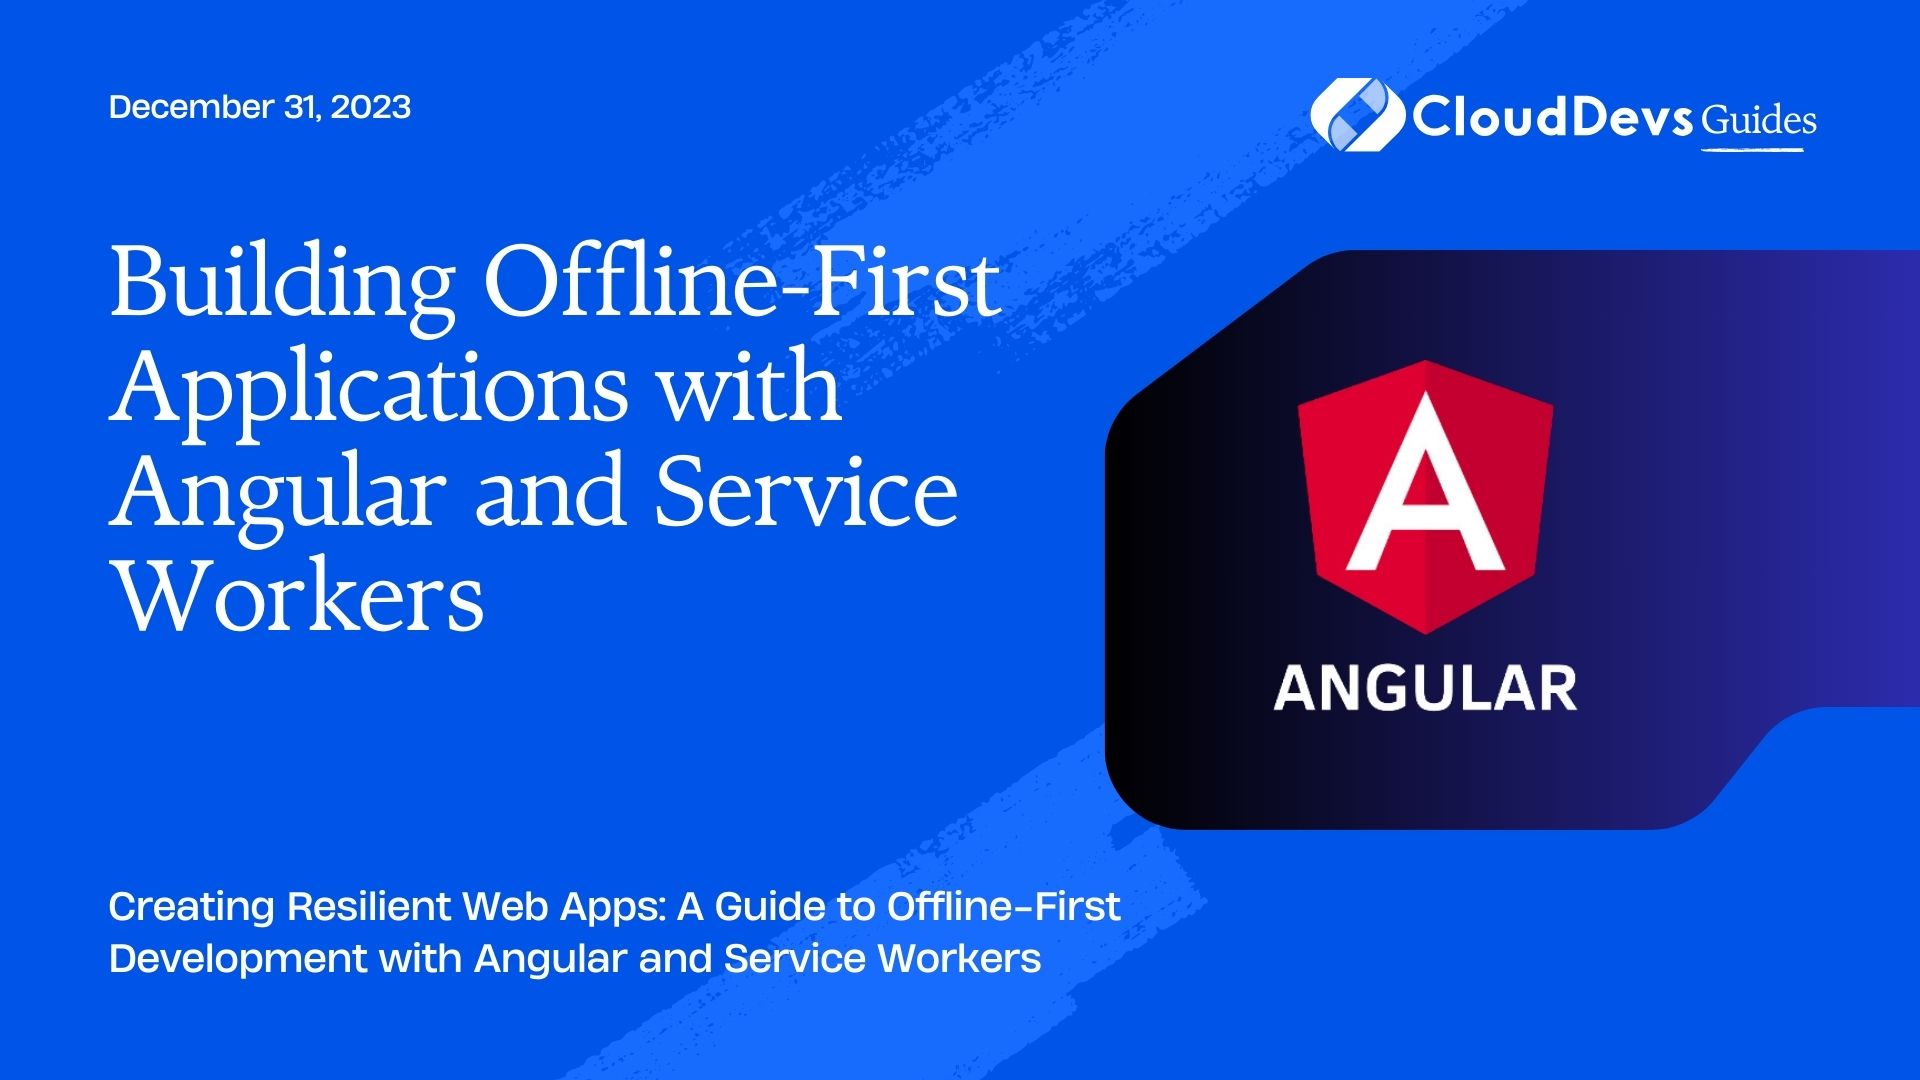 Building Offline-First Applications with Angular and Service Workers